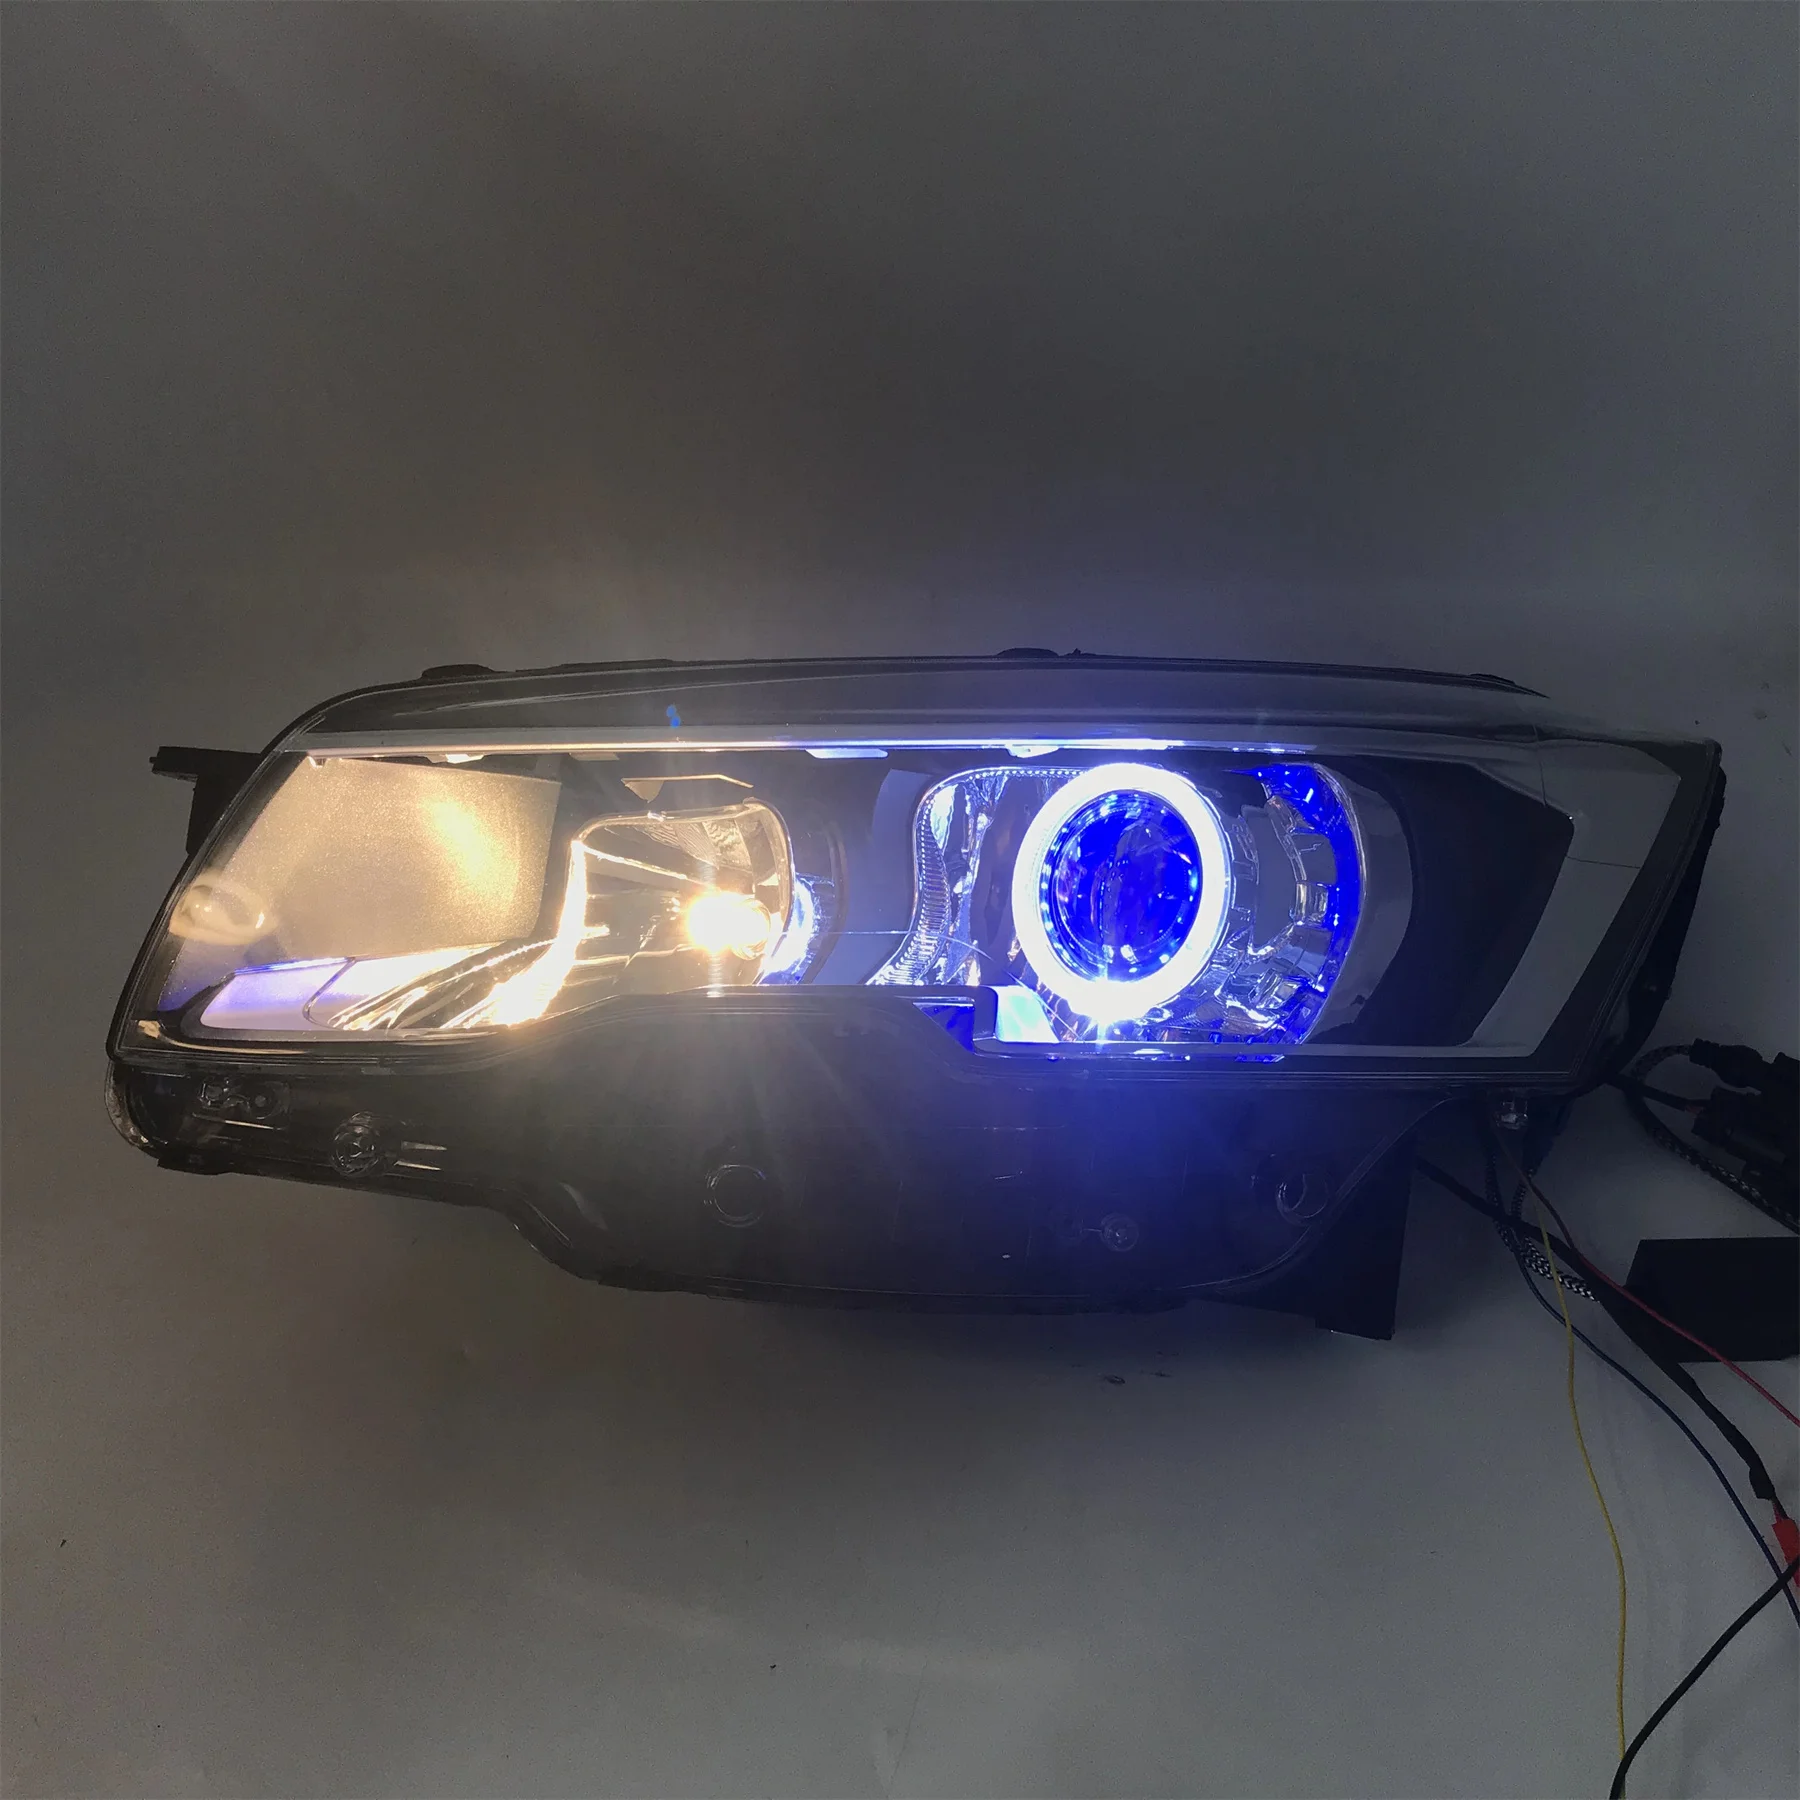 

LED HID Headlight for Peugeot 508 Angel Eye DRL Daytime Running Light Turn Signal with Projector Lens accesorios para auto